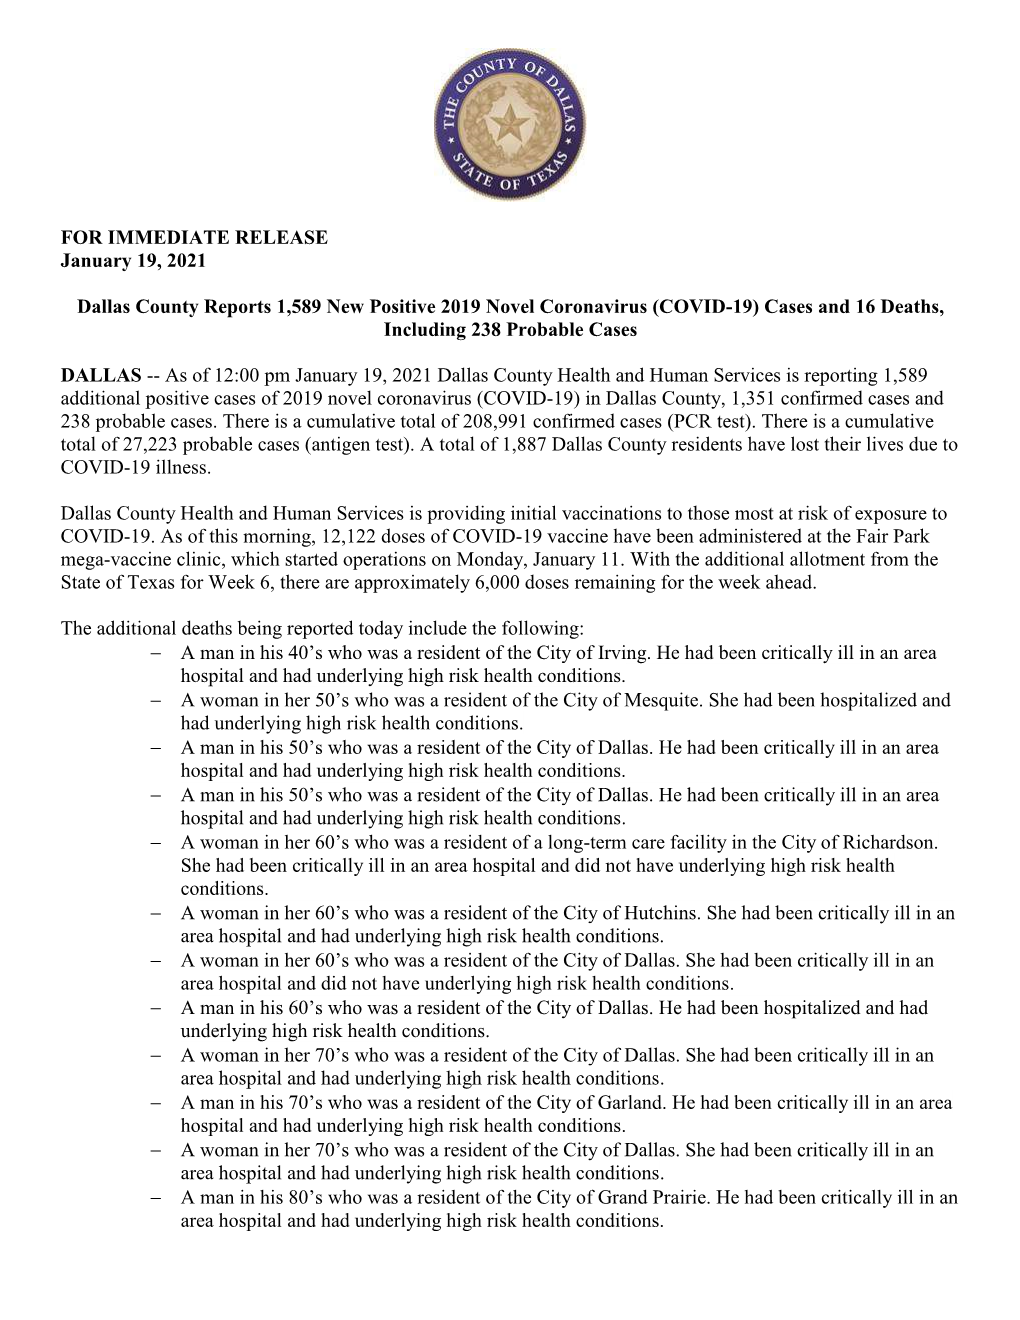 FOR IMMEDIATE RELEASE January 19, 2021 Dallas County Reports 1,589 New Positive 2019 Novel Coronavirus (COVID-19) Cases and 16 D